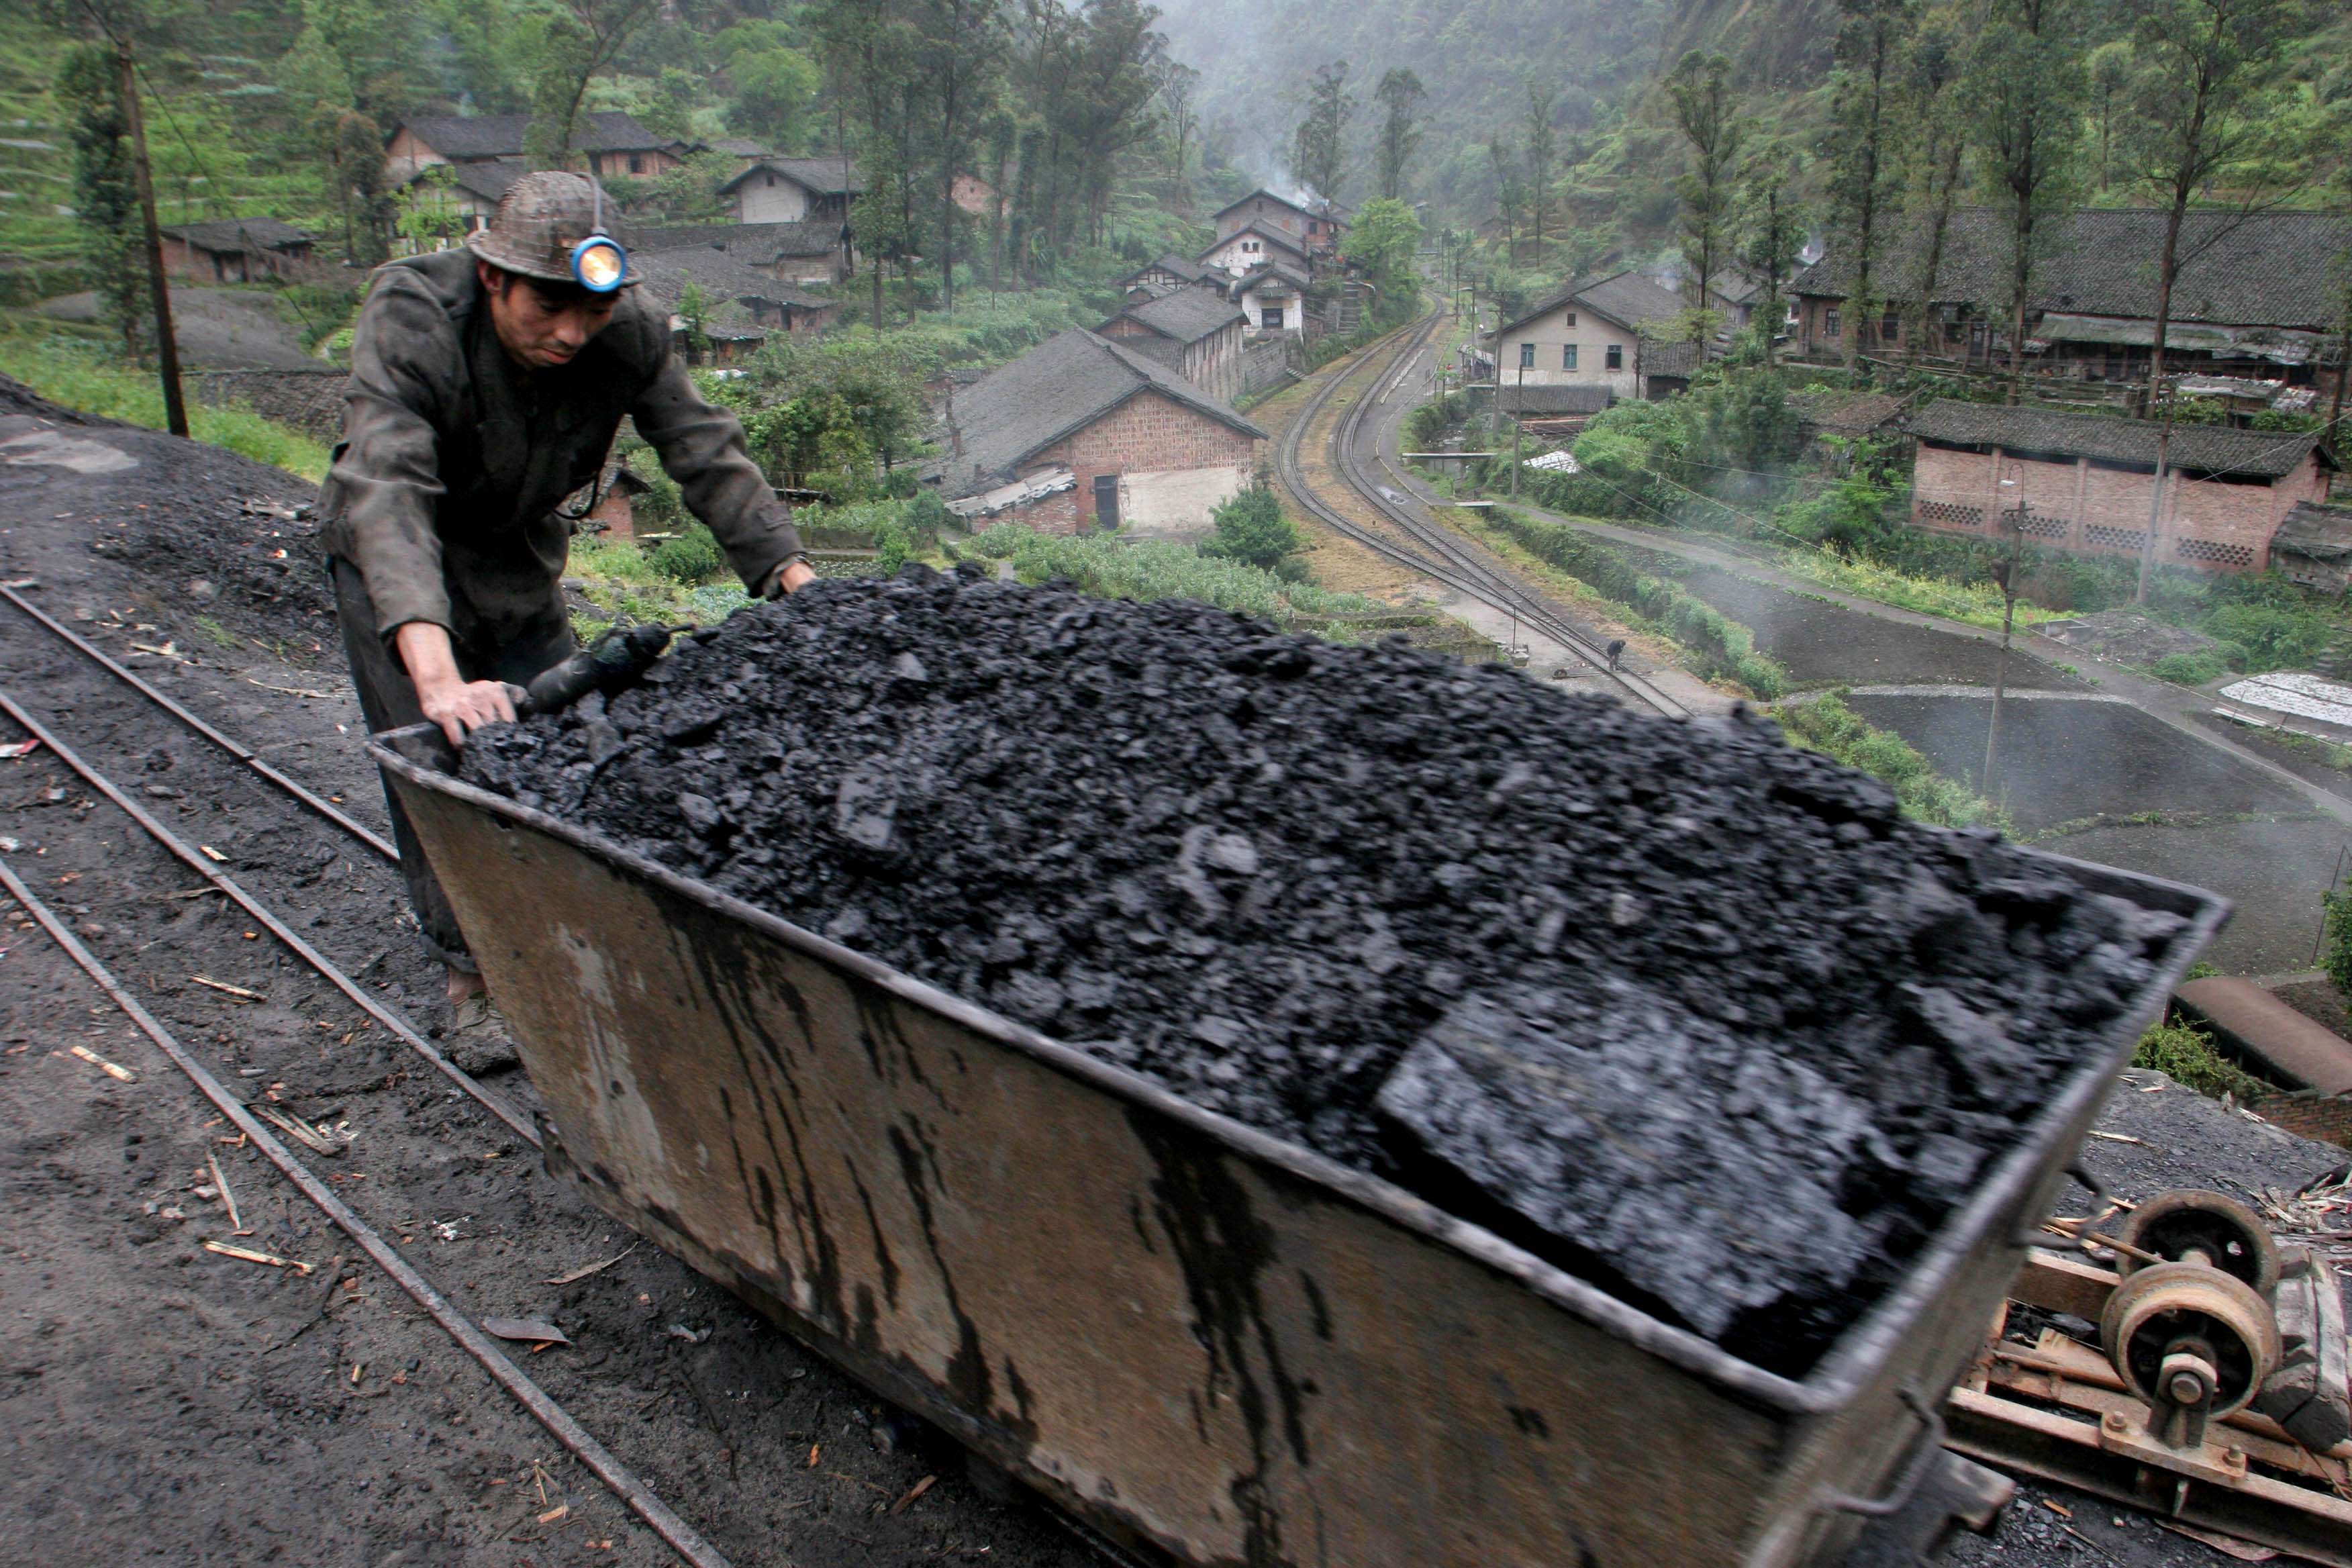 Chinese coal firms have struggled as the country’s economic slowdown batters demand and Premier Li Keqiang vows to cut excess capacity in industry. Photo: AP